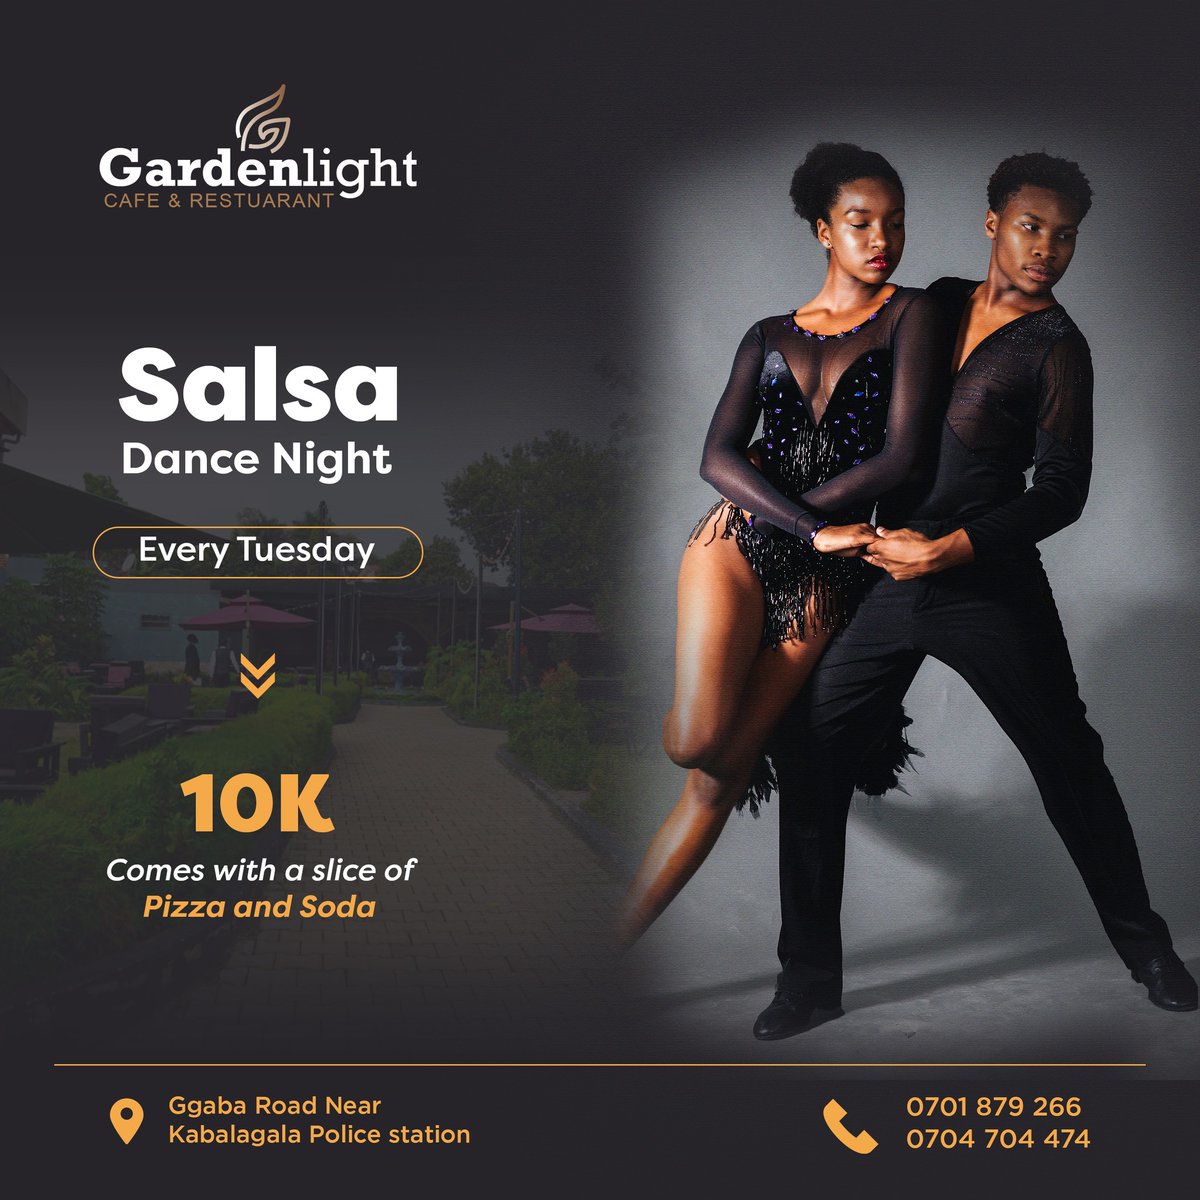 We are thrilled to officially unveil  the long awaited event namely - the Salsa Dance Night happening every single Tuesday of the week at our home in Kabalagala next the police station.

At only Ugx.10000, you get a slice of our delicious pizza and a bottle of Soda while...